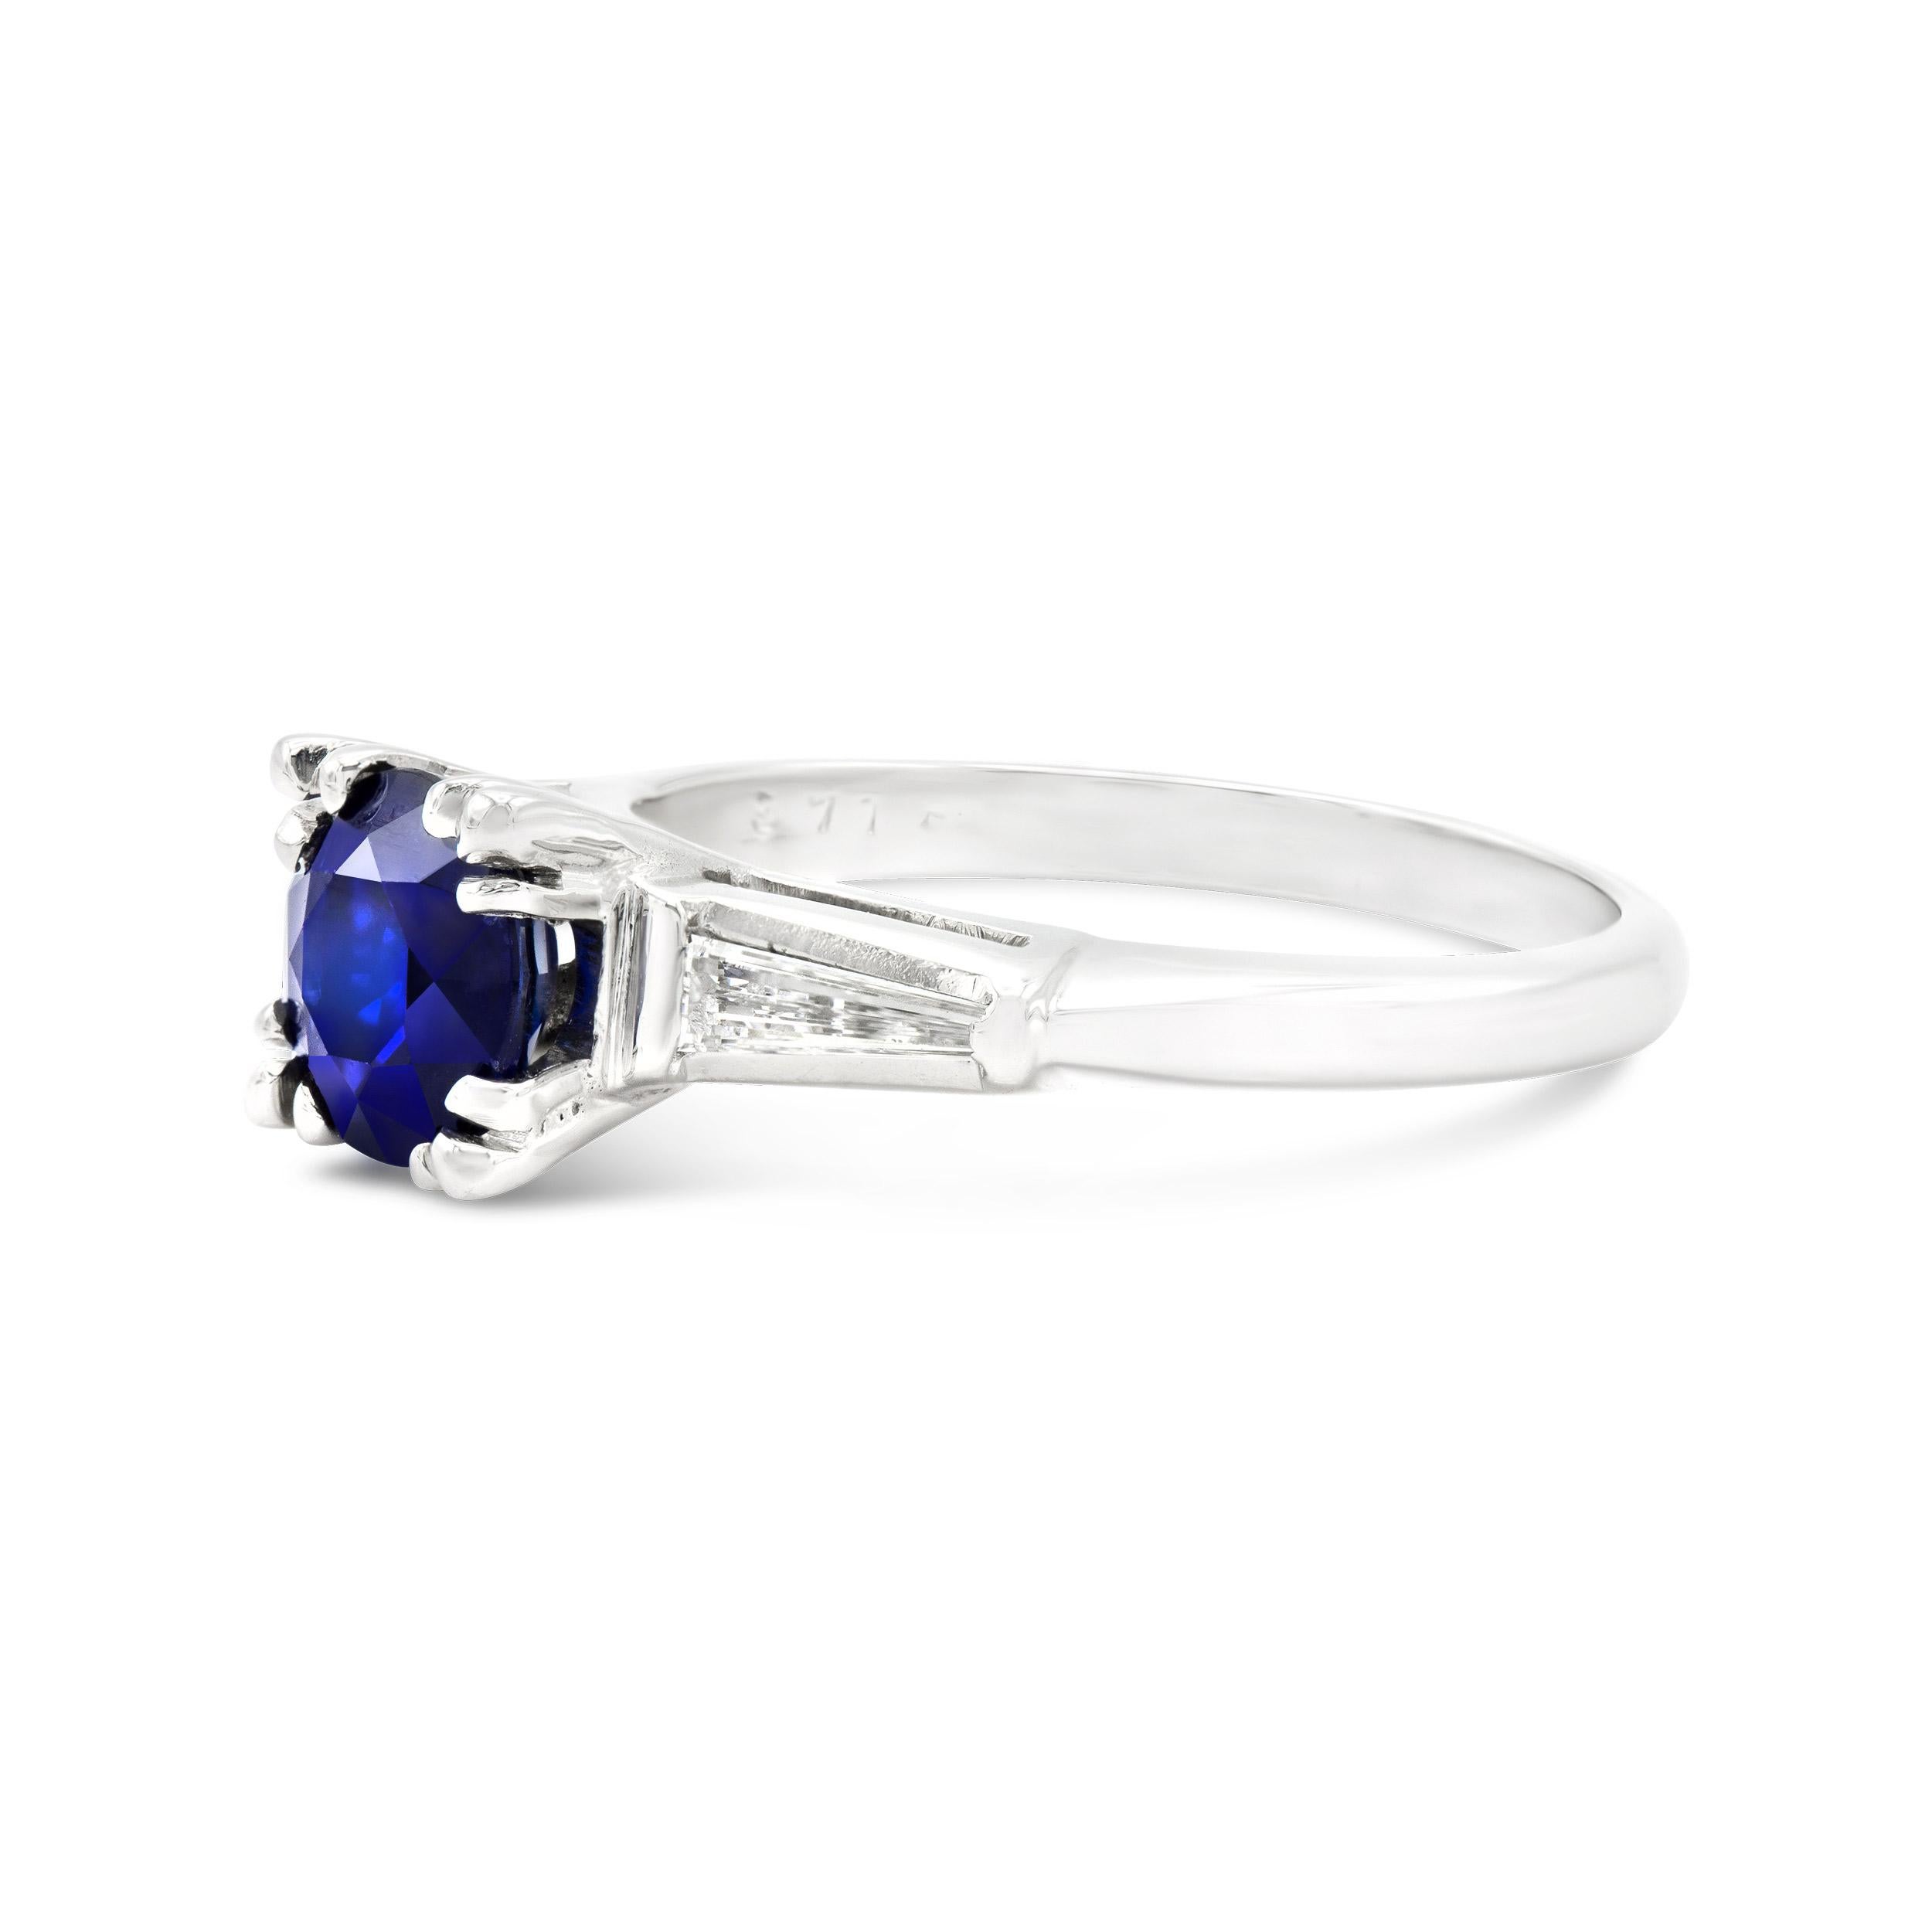 This ring is just how we like it, with a twist. This vintage engagement ring hosts a beautiful 1.05 carat natural sapphire. It's deeply hued and sits sweetly between two super slender tapered baguettes. We love the modern feel of this vintage